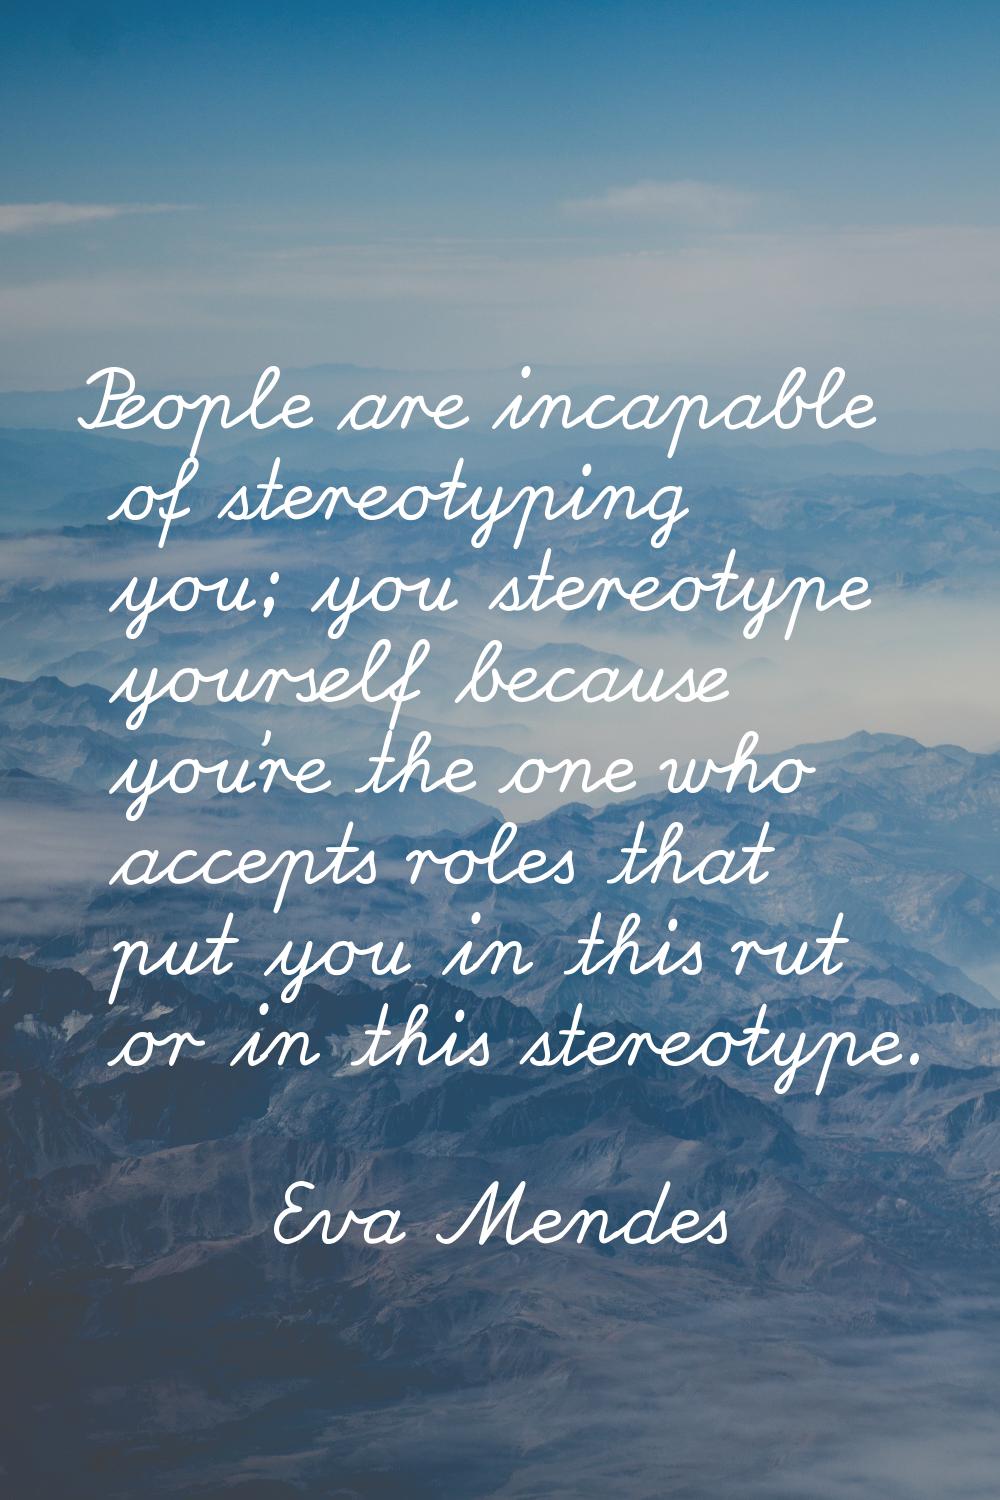 People are incapable of stereotyping you; you stereotype yourself because you're the one who accept